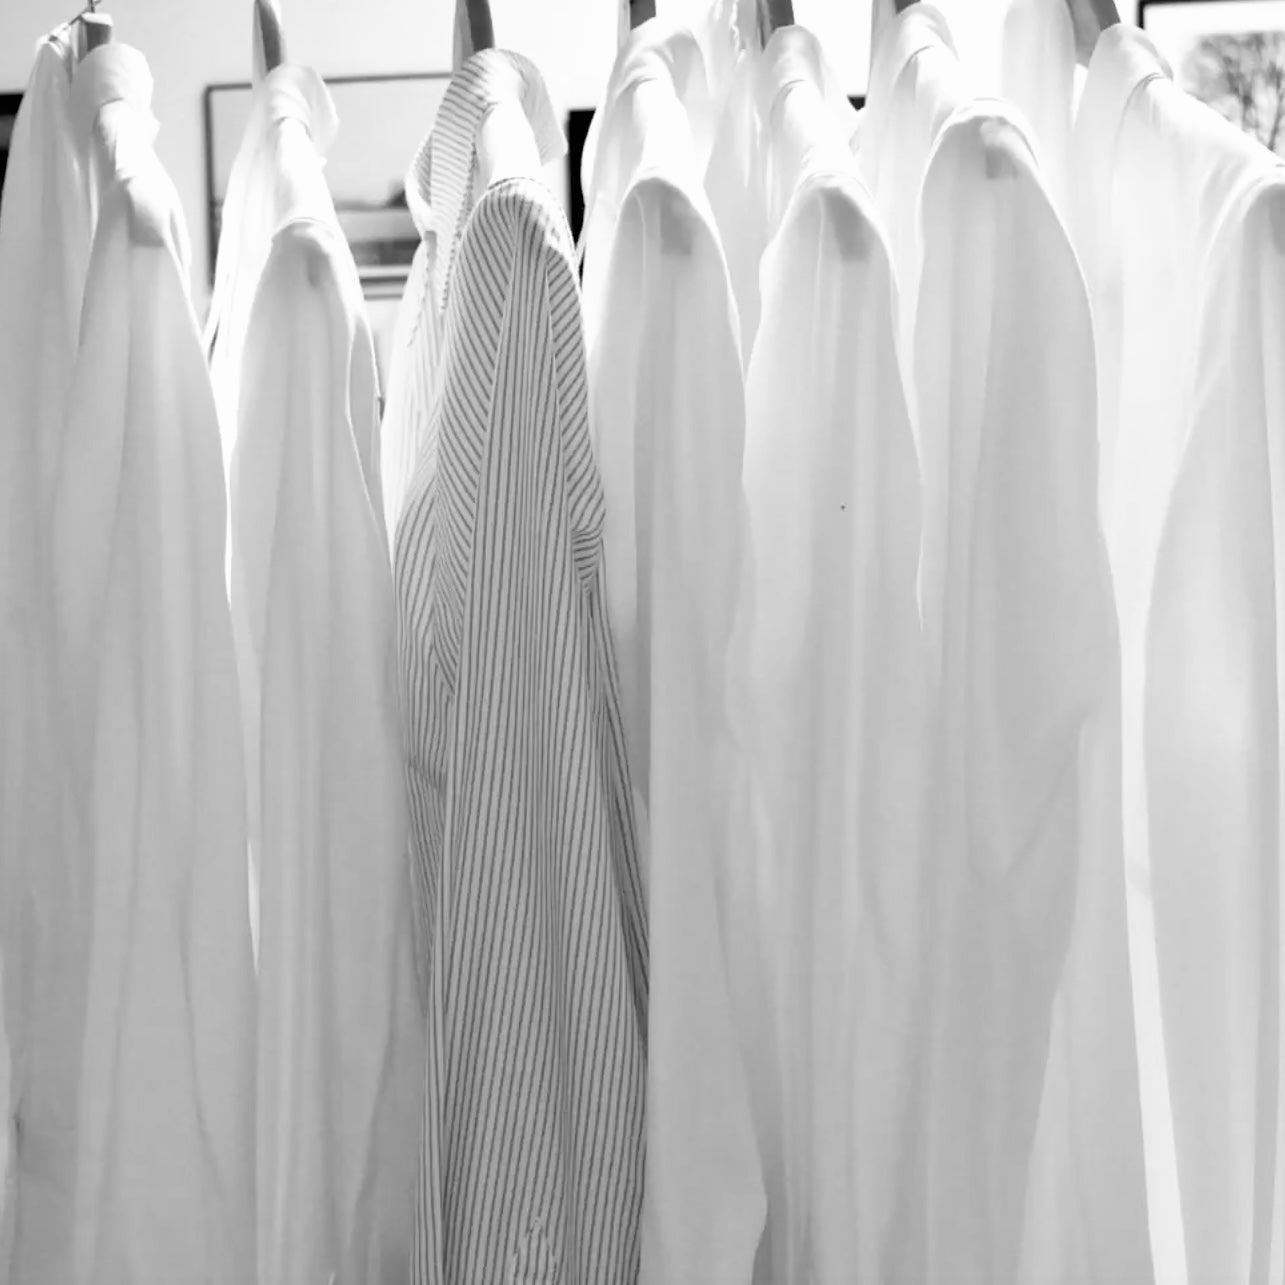 A rack of shirts on hangers